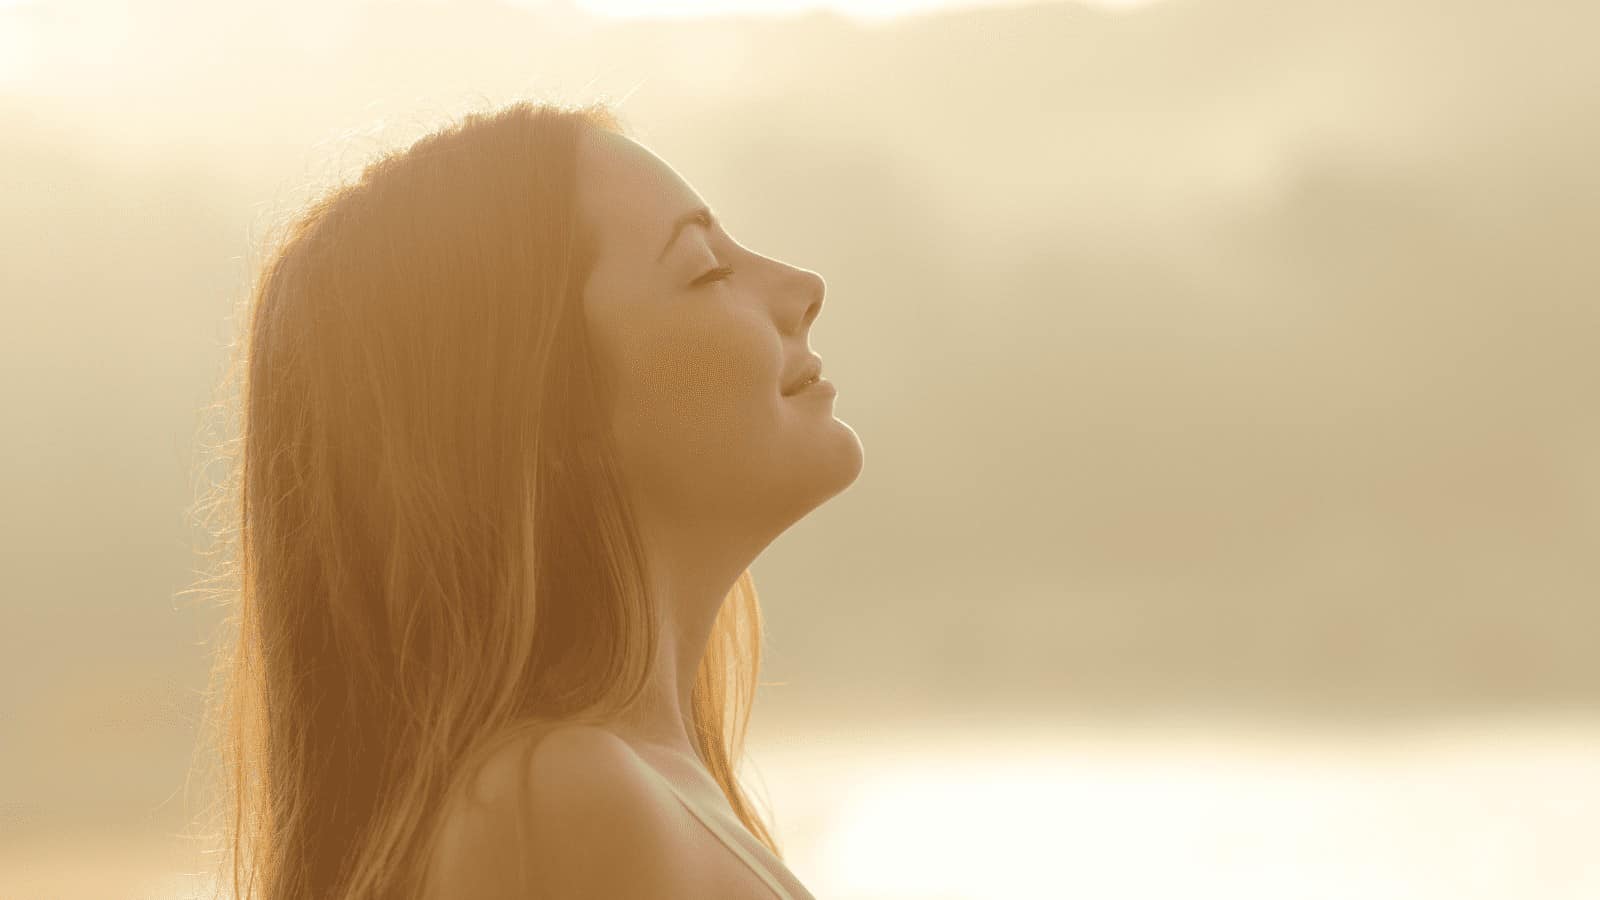 10 Habits That Can Soothe Your Soul After a Loss